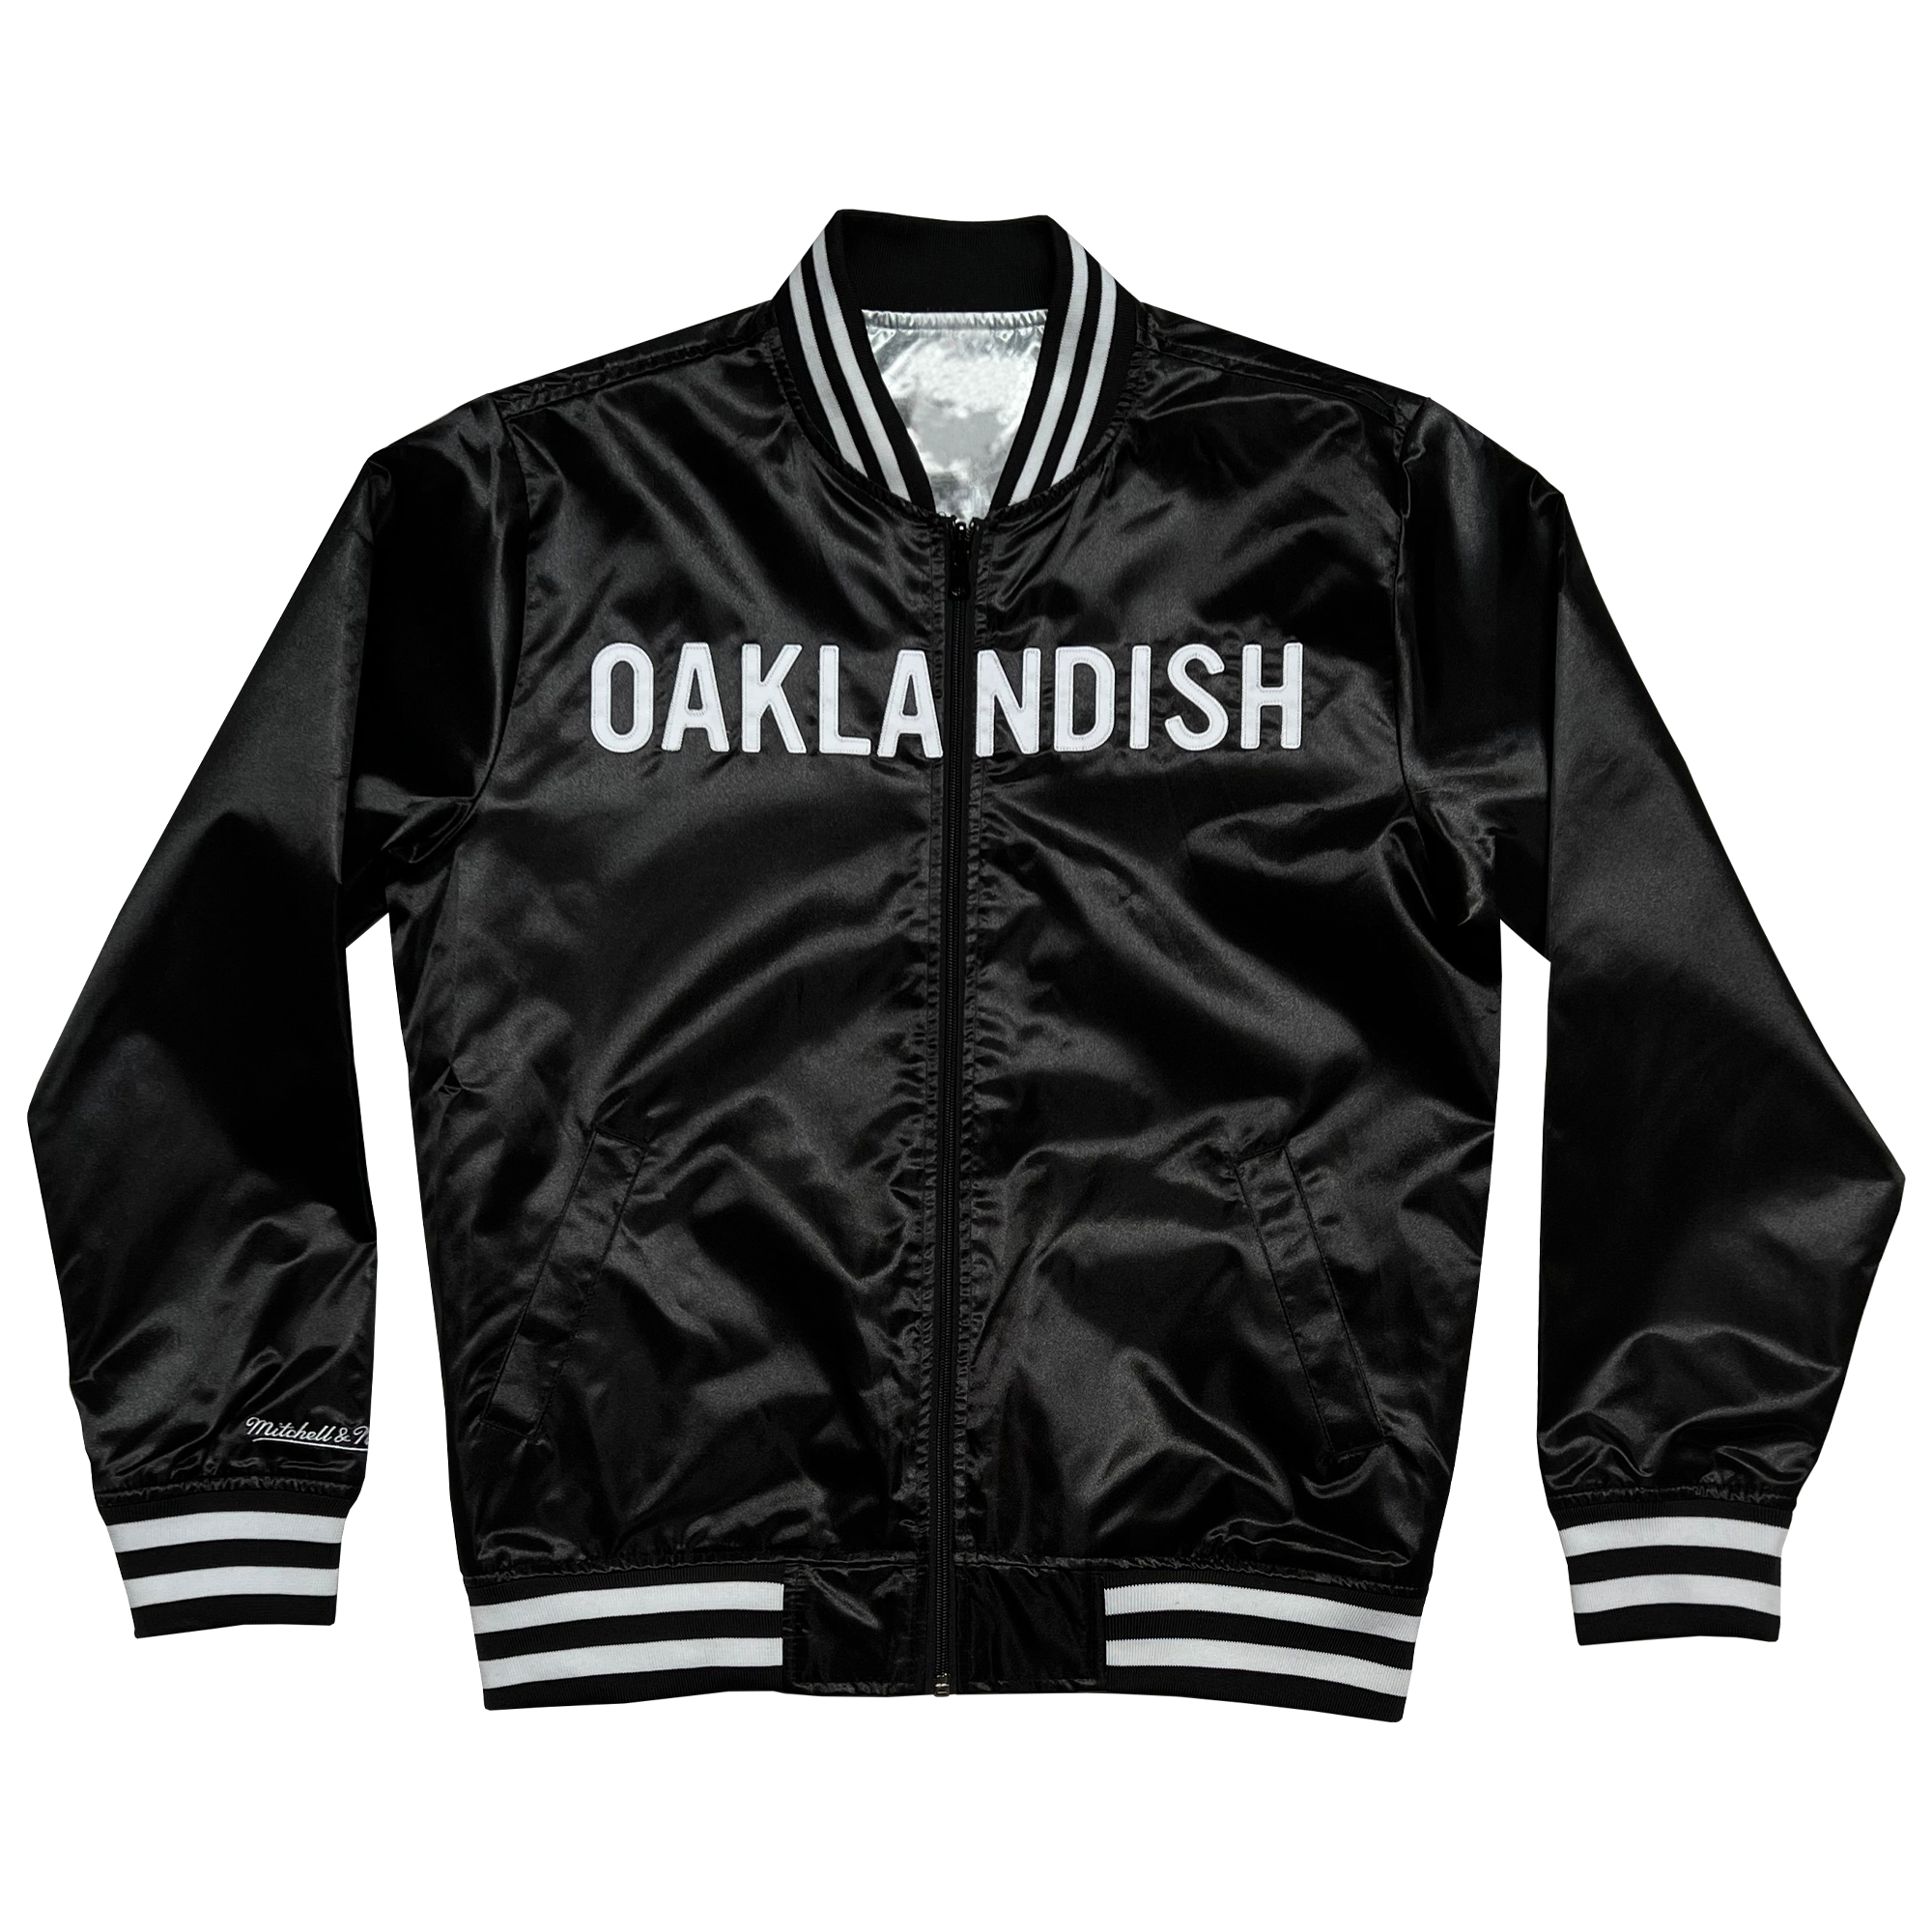 Mitchell & Ness black satin reversible jacket with Oaklandish wordmark across front chest with black and white ribbing at collar, cuff, and waistband.